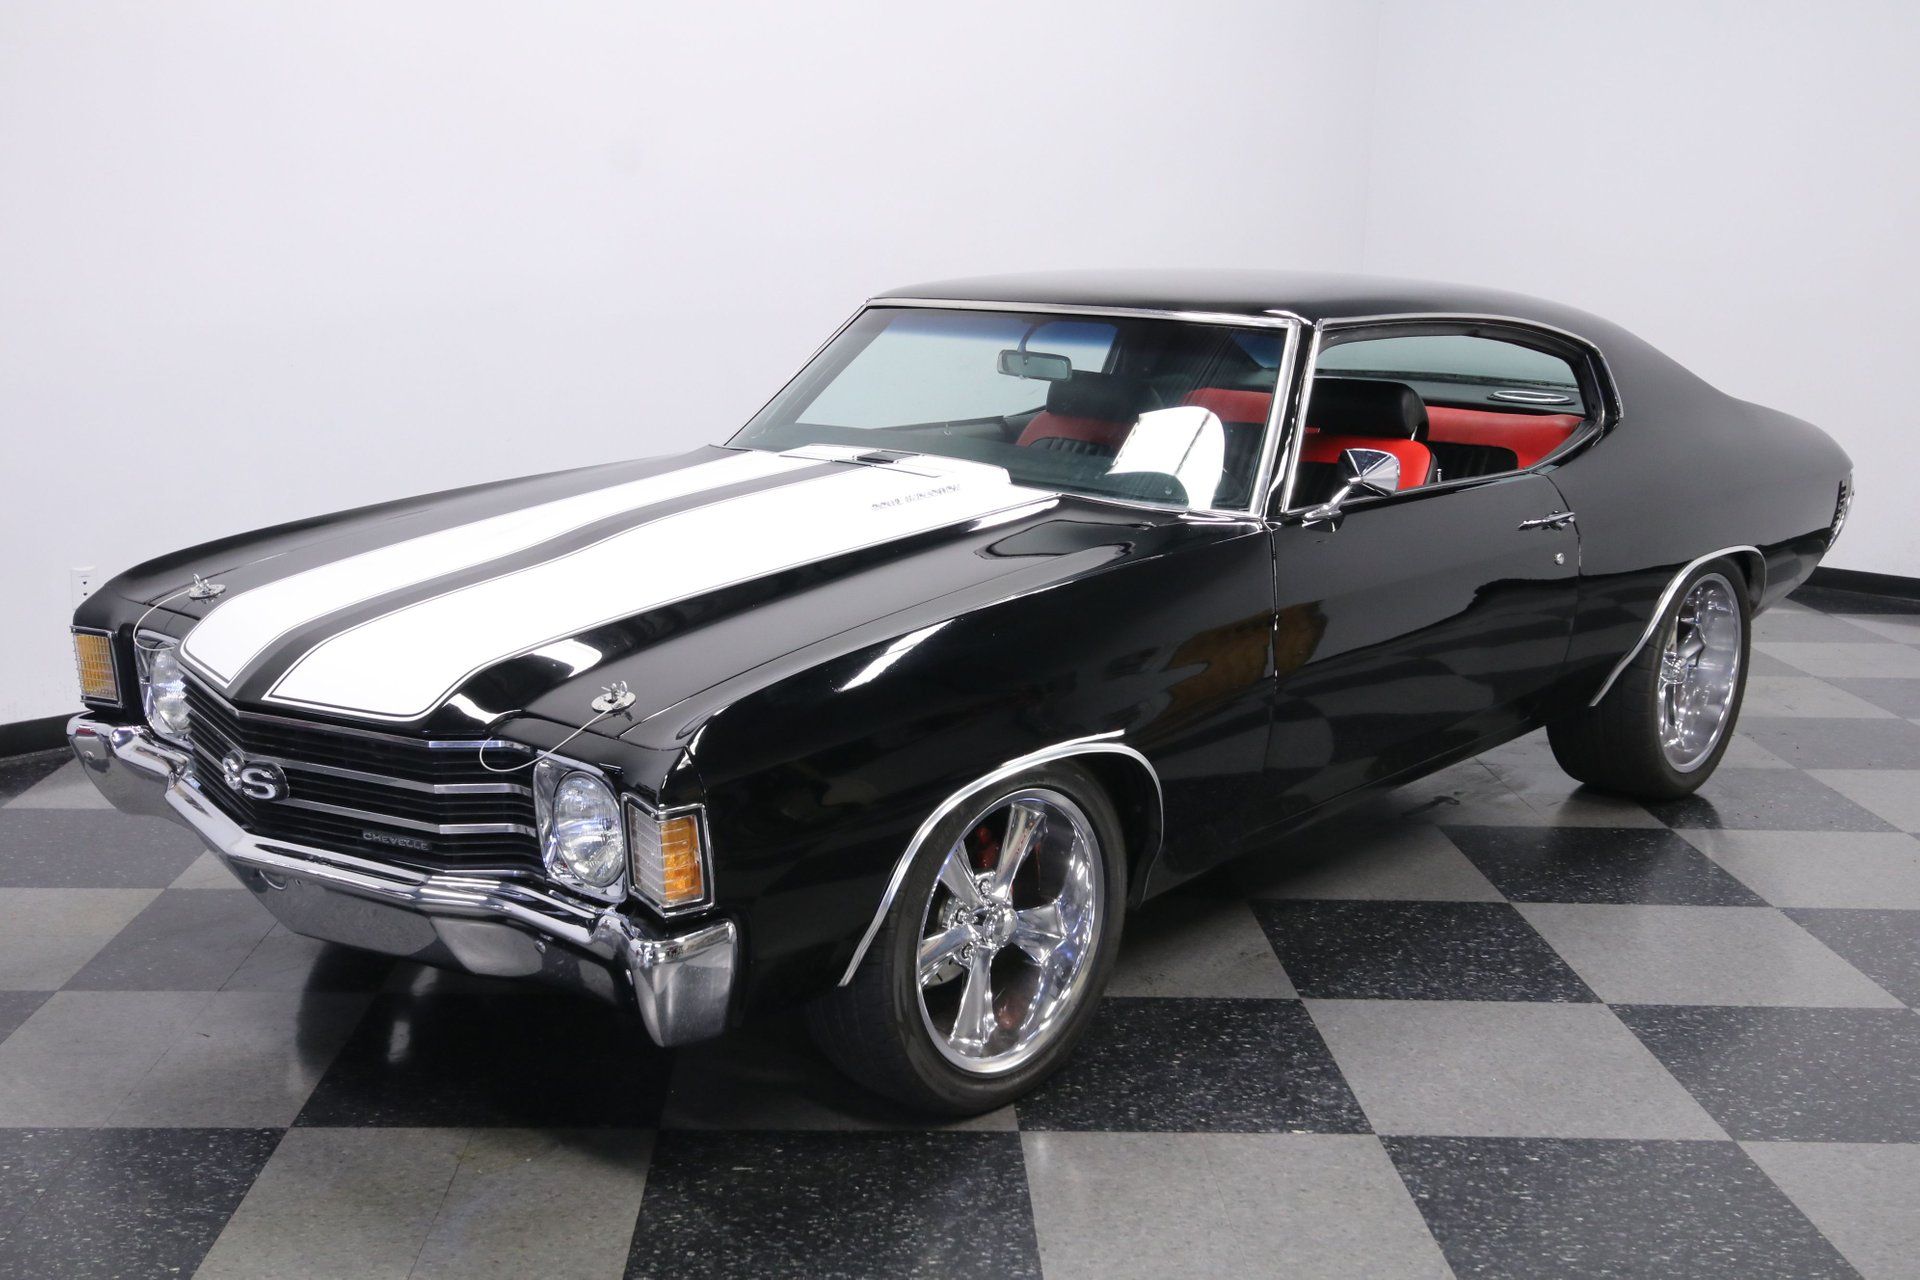 LS7-Powered 1972 Chevy Chevelle SS Restomod